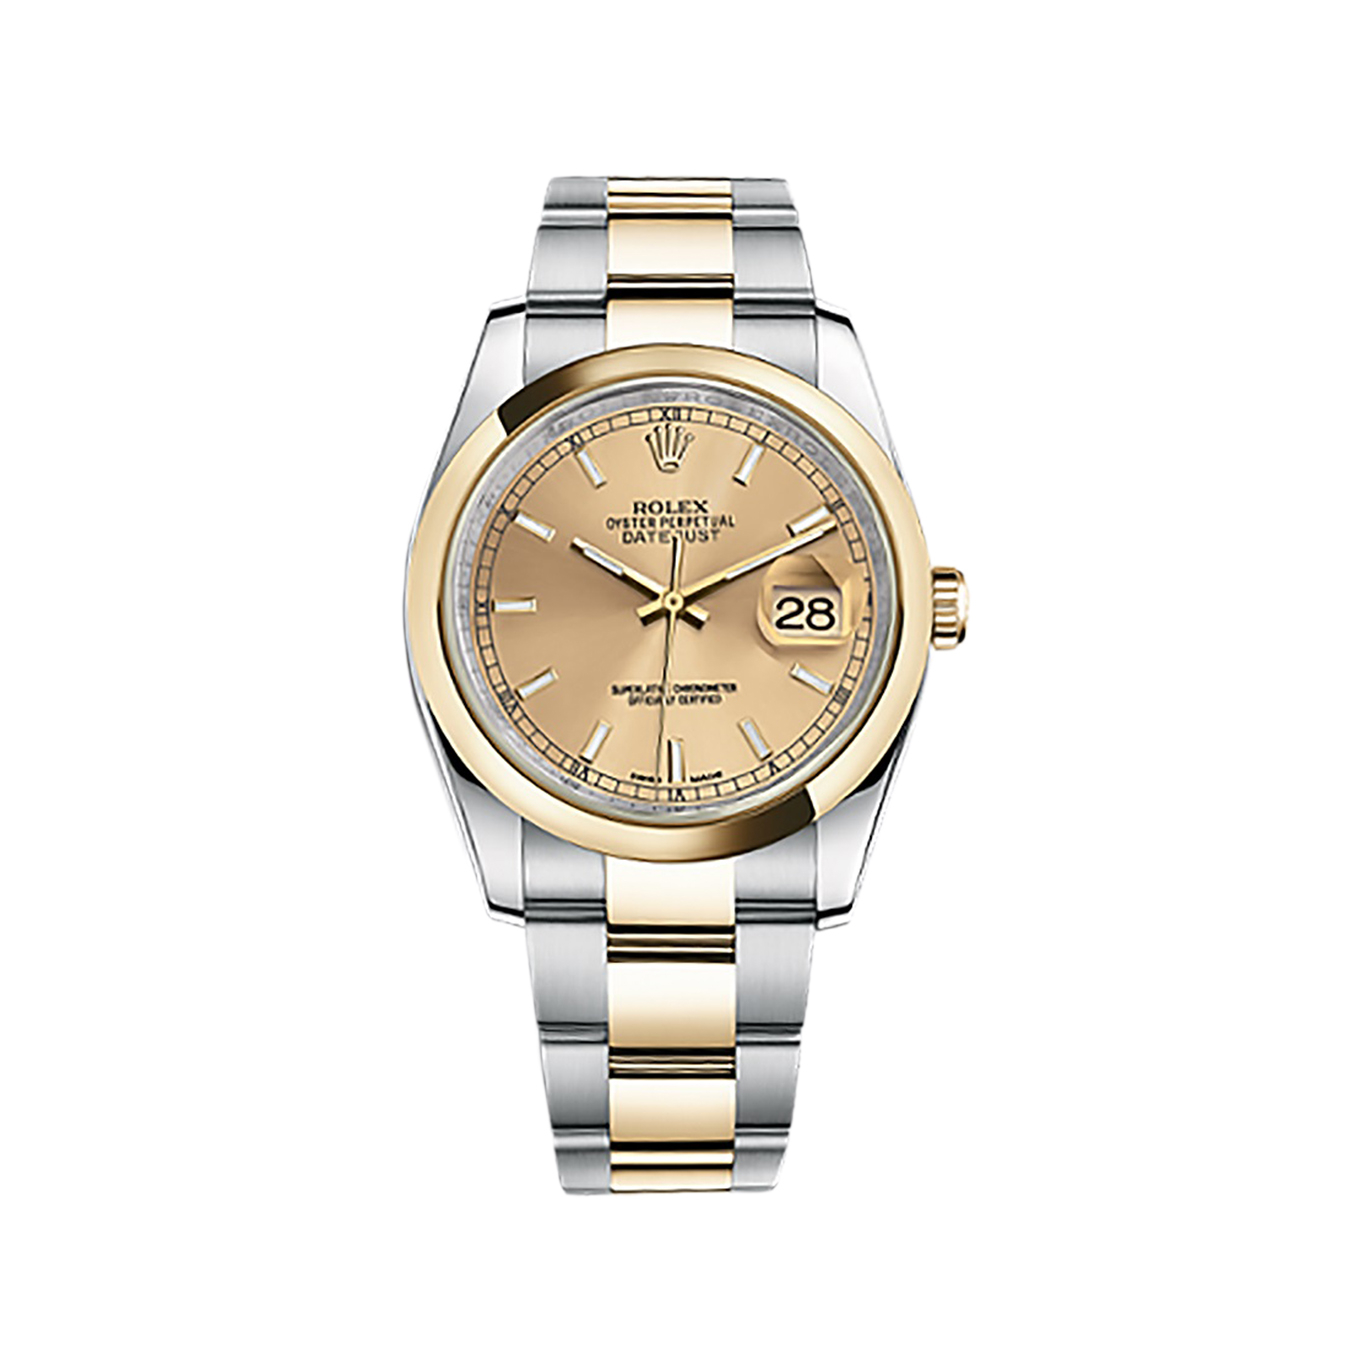 Datejust 36 116203 Gold & Stainless Steel Watch (Champagne)